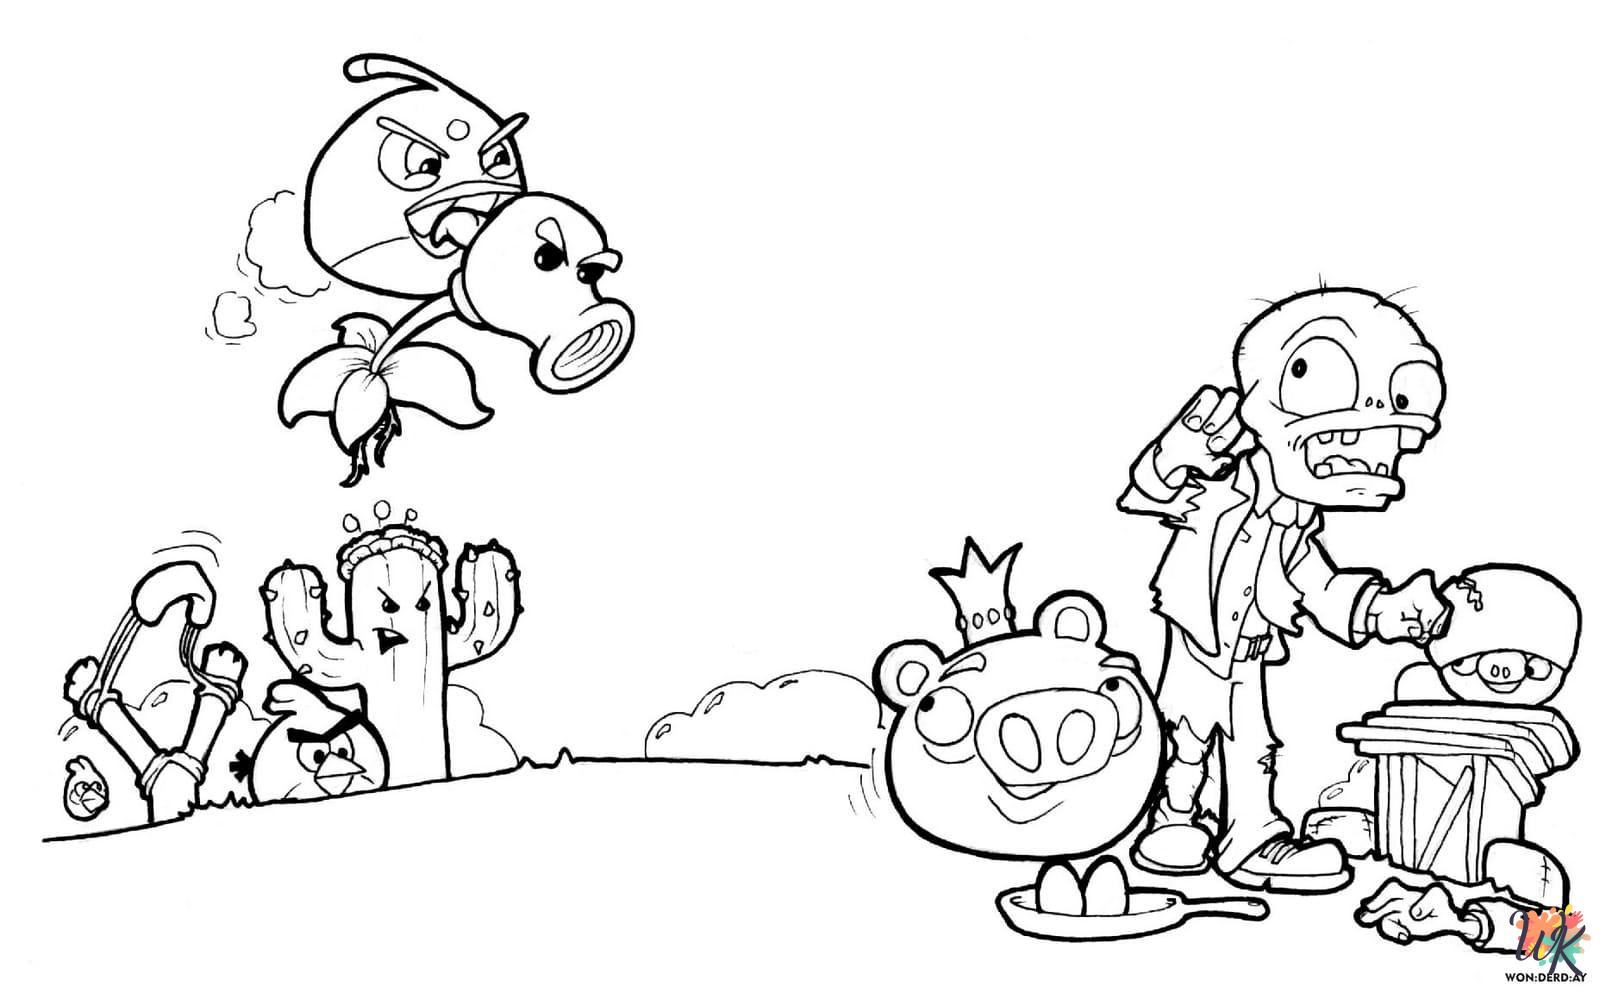 Plants vs. Zombies coloring pages for kids